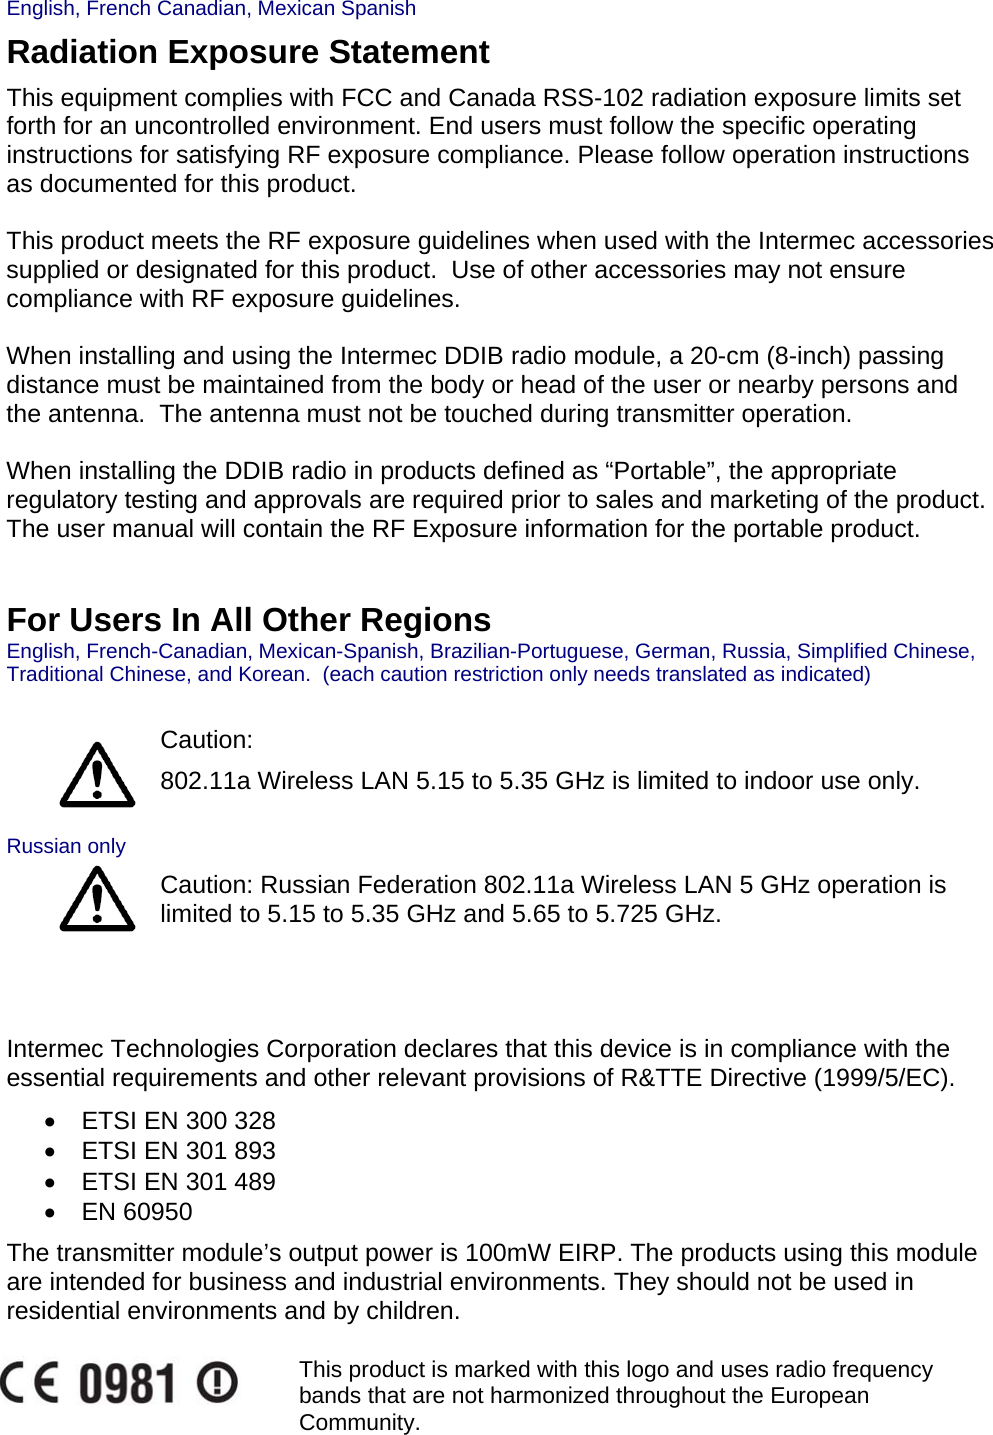 English, French Canadian, Mexican Spanish Radiation Exposure Statement This equipment complies with FCC and Canada RSS-102 radiation exposure limits set forth for an uncontrolled environment. End users must follow the specific operating instructions for satisfying RF exposure compliance. Please follow operation instructions as documented for this product.  This product meets the RF exposure guidelines when used with the Intermec accessories supplied or designated for this product.  Use of other accessories may not ensure compliance with RF exposure guidelines.  When installing and using the Intermec DDIB radio module, a 20-cm (8-inch) passing distance must be maintained from the body or head of the user or nearby persons and the antenna.  The antenna must not be touched during transmitter operation.  When installing the DDIB radio in products defined as “Portable”, the appropriate regulatory testing and approvals are required prior to sales and marketing of the product.  The user manual will contain the RF Exposure information for the portable product.   For Users In All Other Regions English, French-Canadian, Mexican-Spanish, Brazilian-Portuguese, German, Russia, Simplified Chinese, Traditional Chinese, and Korean.  (each caution restriction only needs translated as indicated)    Caution:  802.11a Wireless LAN 5.15 to 5.35 GHz is limited to indoor use only.  Russian only  Caution: Russian Federation 802.11a Wireless LAN 5 GHz operation is limited to 5.15 to 5.35 GHz and 5.65 to 5.725 GHz.    Intermec Technologies Corporation declares that this device is in compliance with the essential requirements and other relevant provisions of R&amp;TTE Directive (1999/5/EC).    •  ETSI EN 300 328  •  ETSI EN 301 893  •  ETSI EN 301 489  • EN 60950 The transmitter module’s output power is 100mW EIRP. The products using this module are intended for business and industrial environments. They should not be used in residential environments and by children.   This product is marked with this logo and uses radio frequency bands that are not harmonized throughout the European Community.   